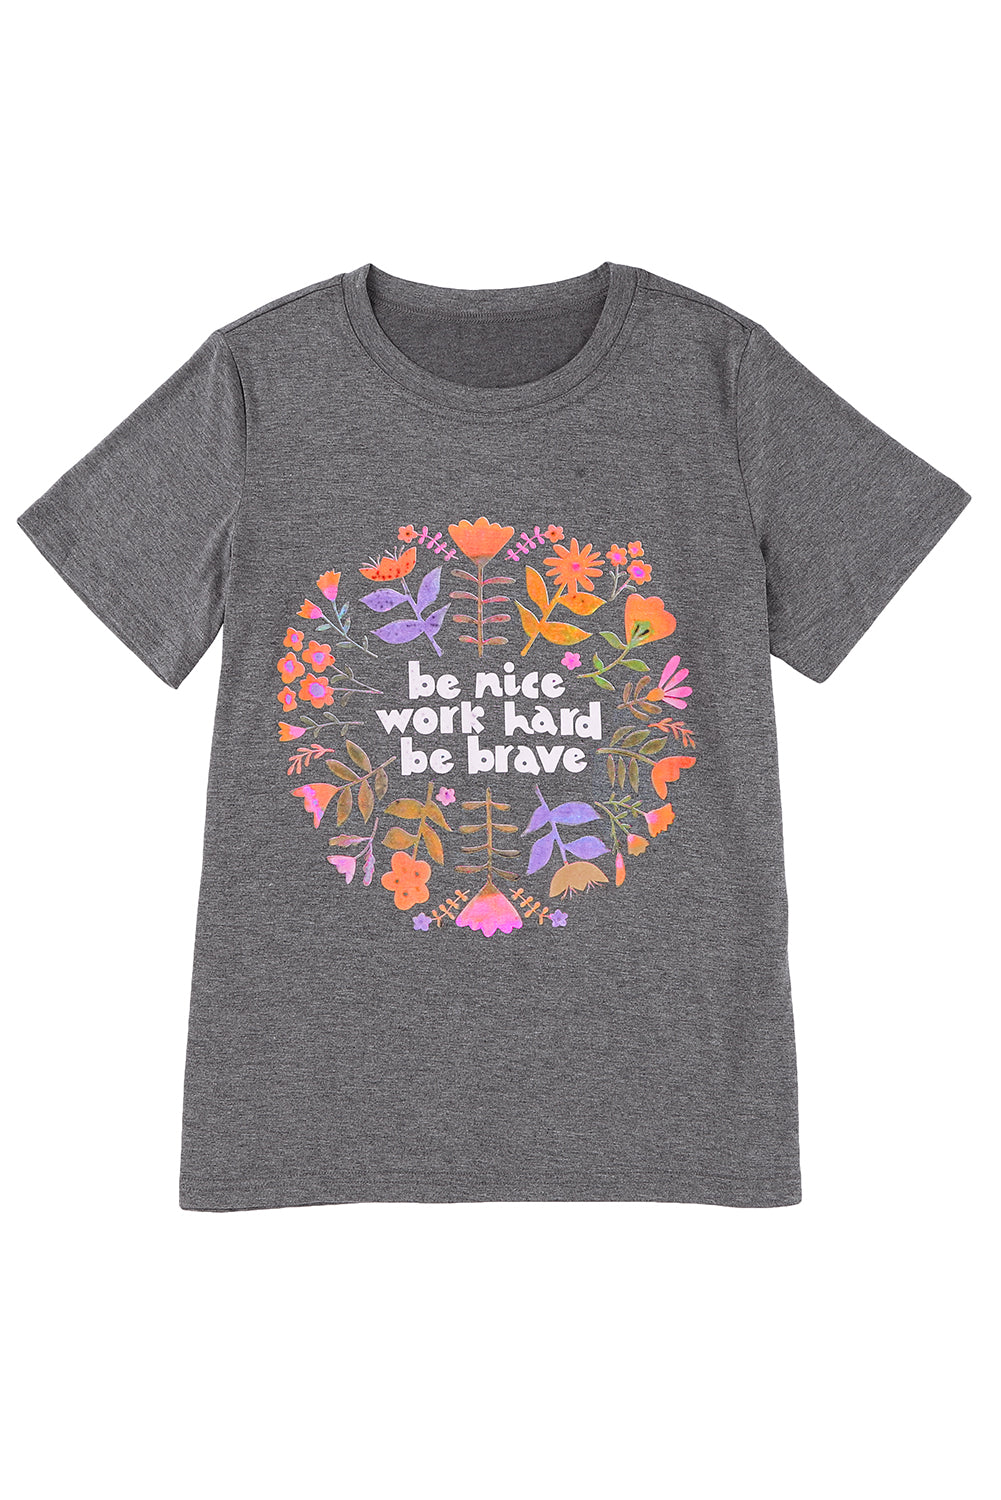 KINDNESS MATTERS Flower Graphic Tee